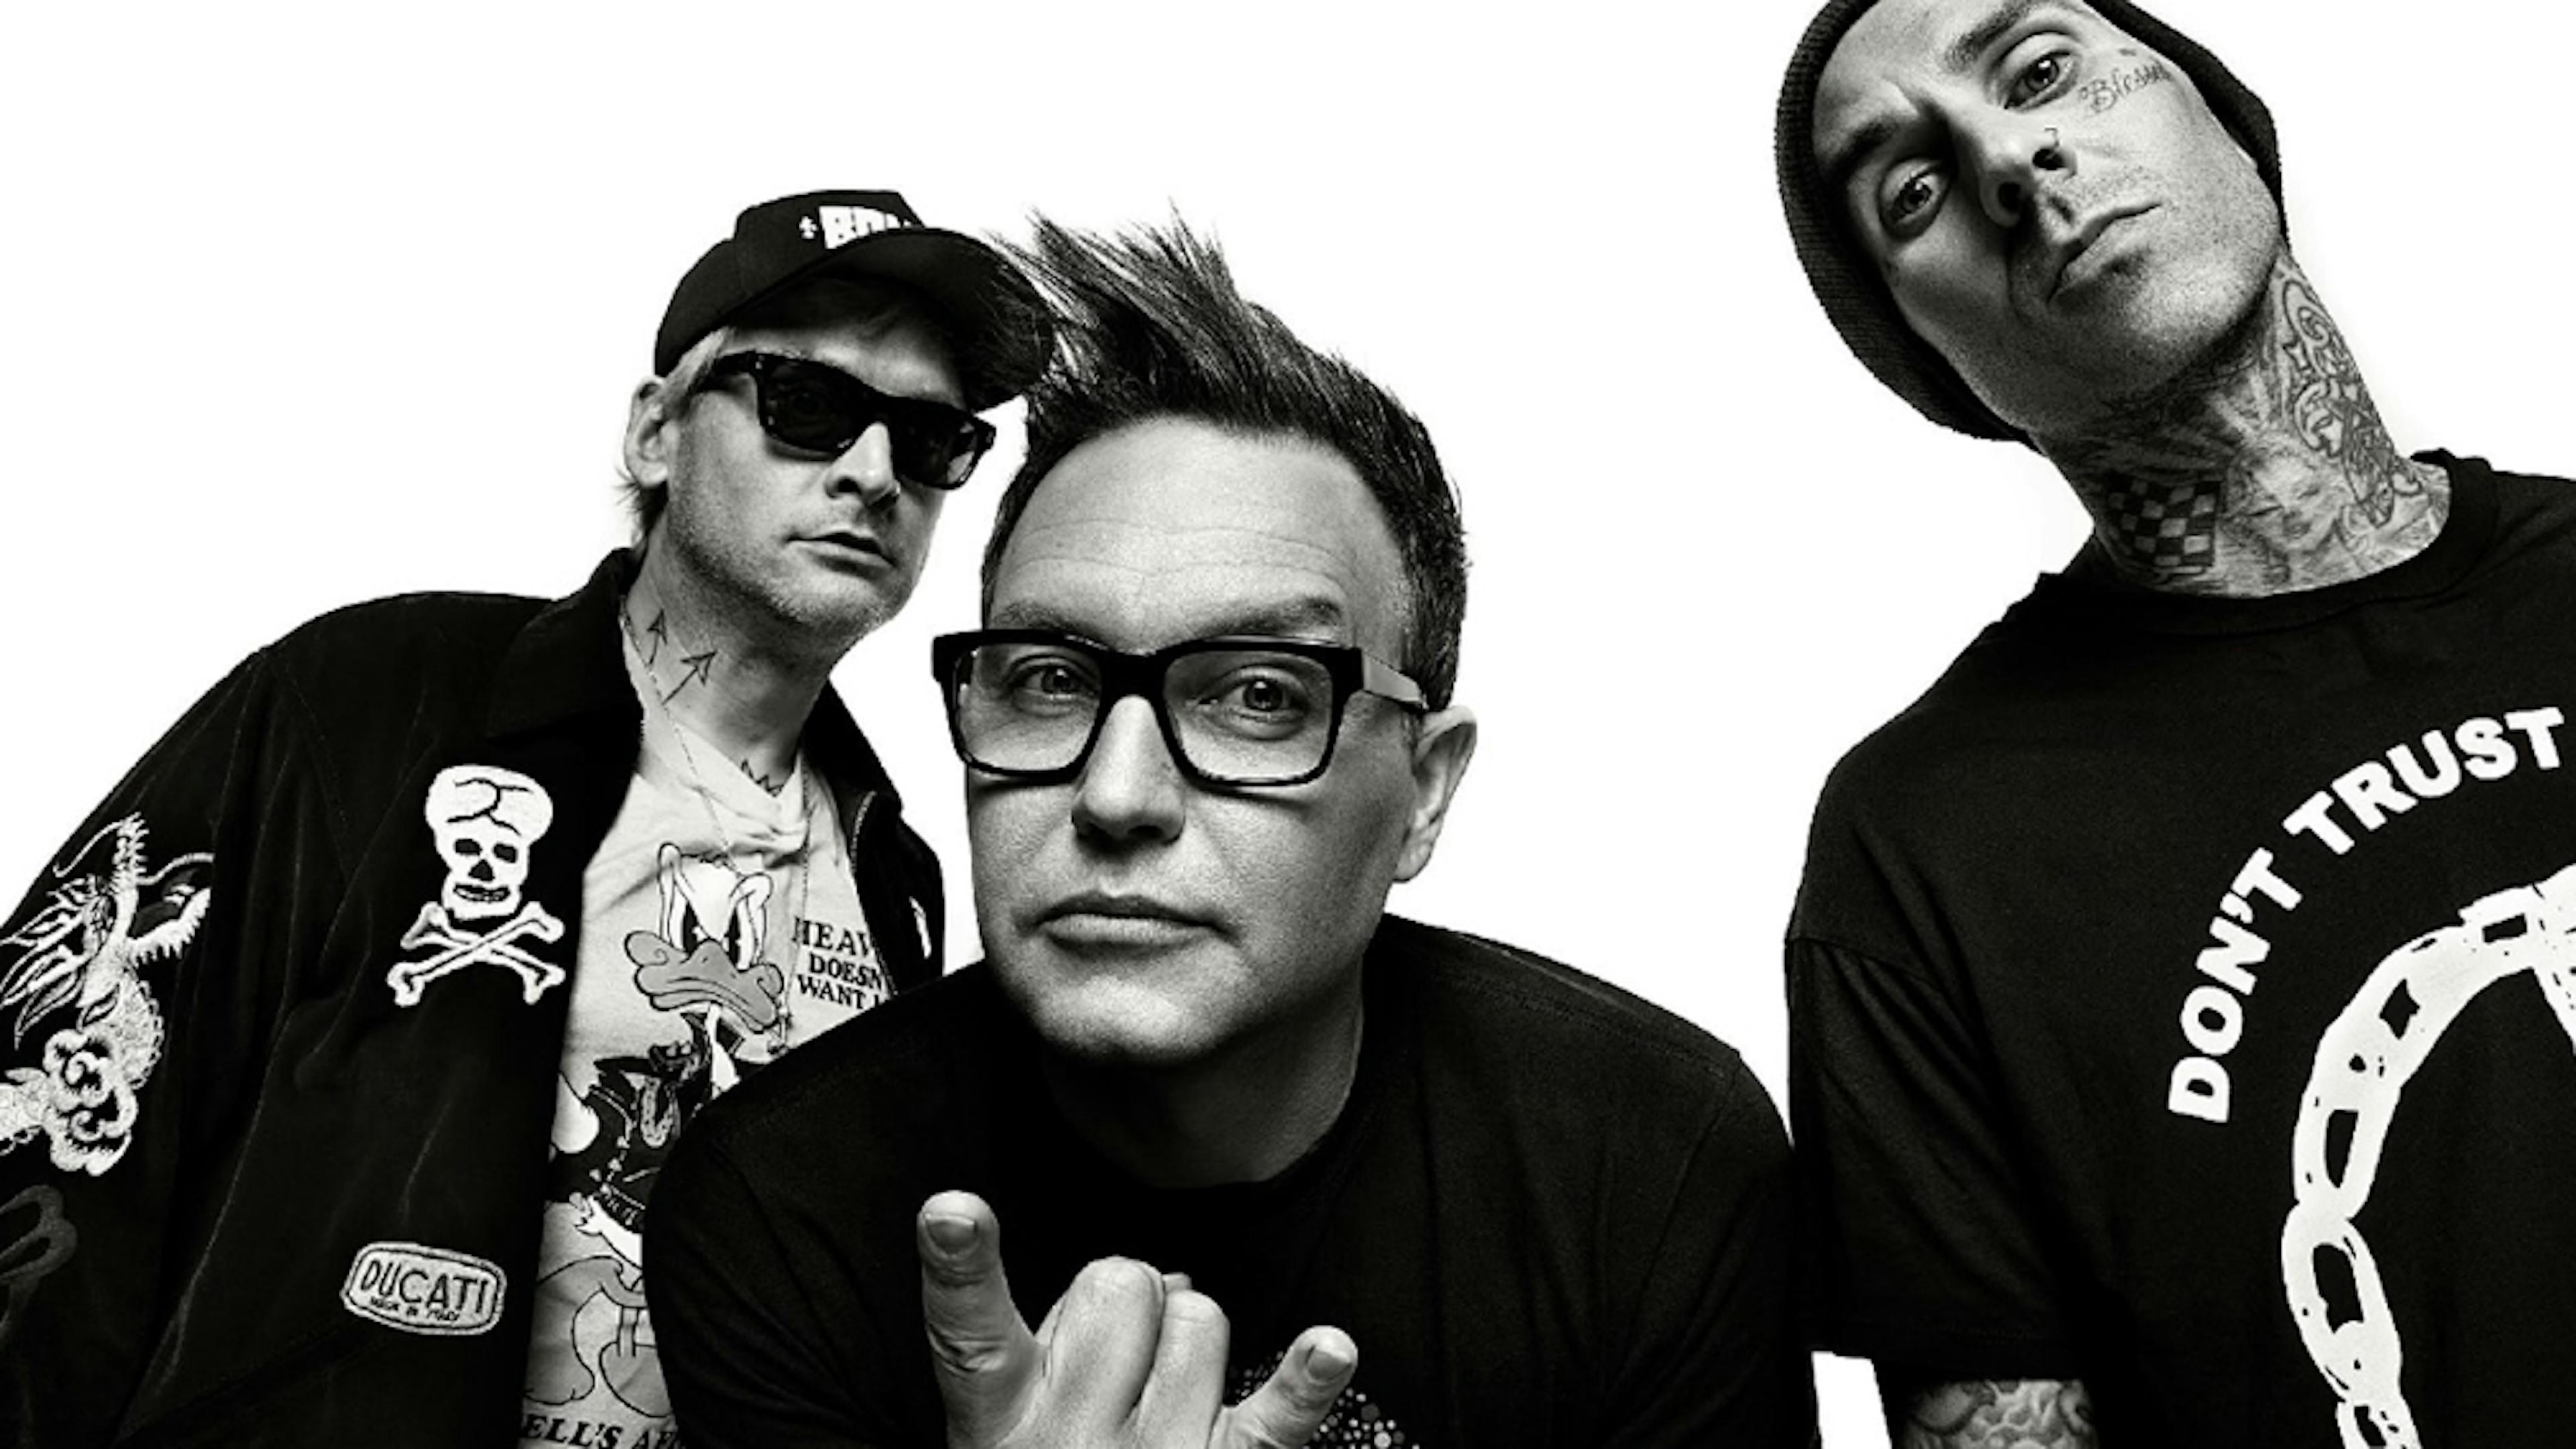 Mark Hoppus Reveals The Meaning Behind blink-182's New Album Title